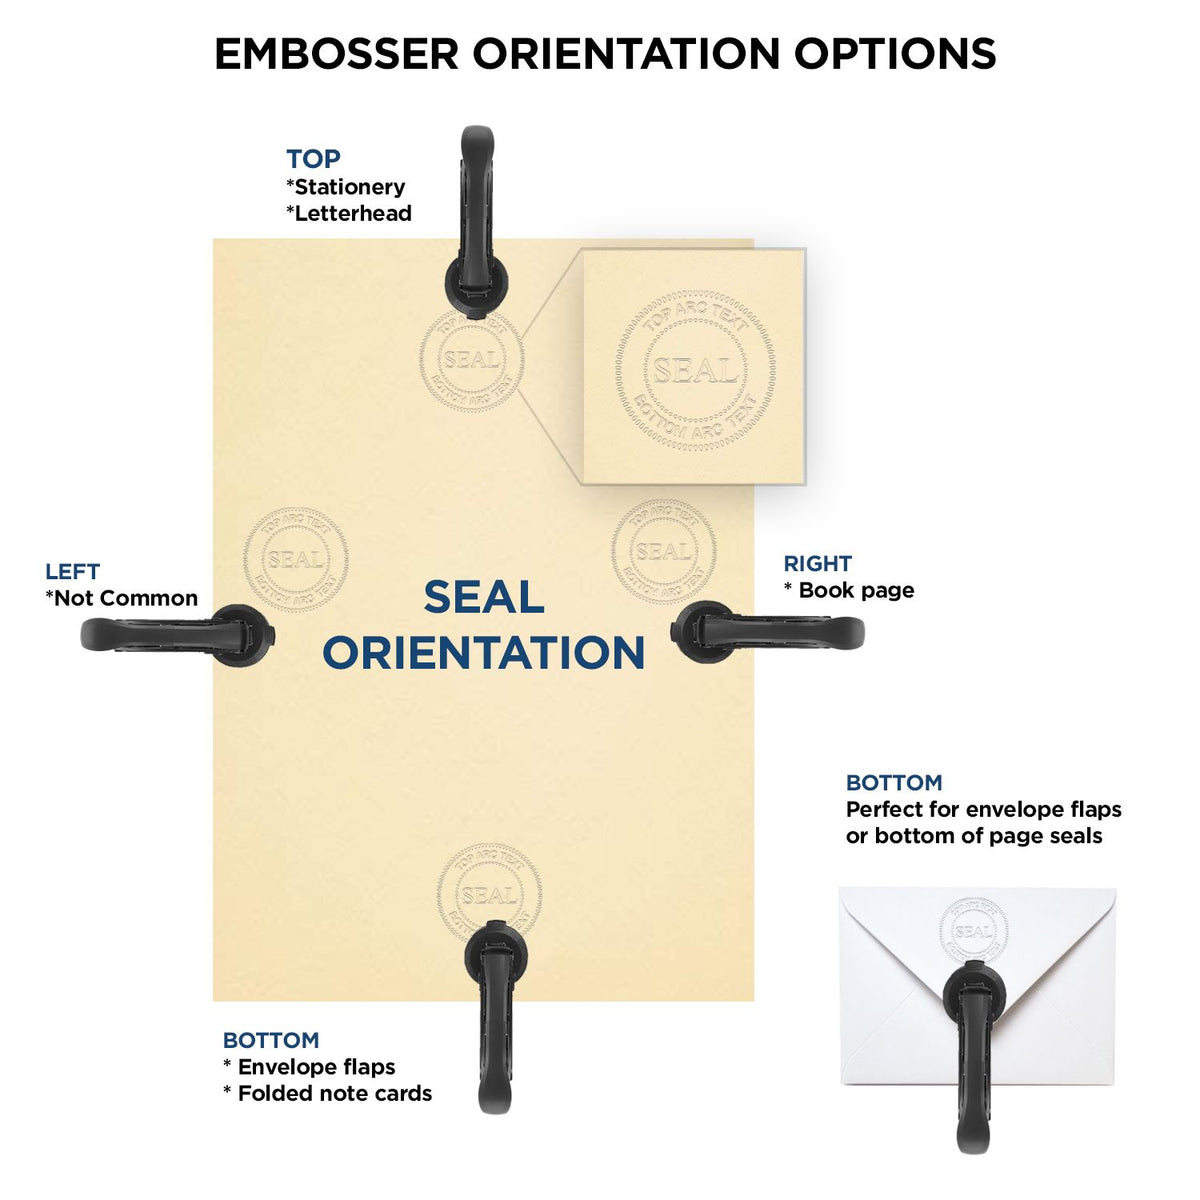 An infographic for the Soft Pocket Nevada Landscape Architect Embosser showing embosser orientation, this is showing examples of a top, bottom, right and left insert.